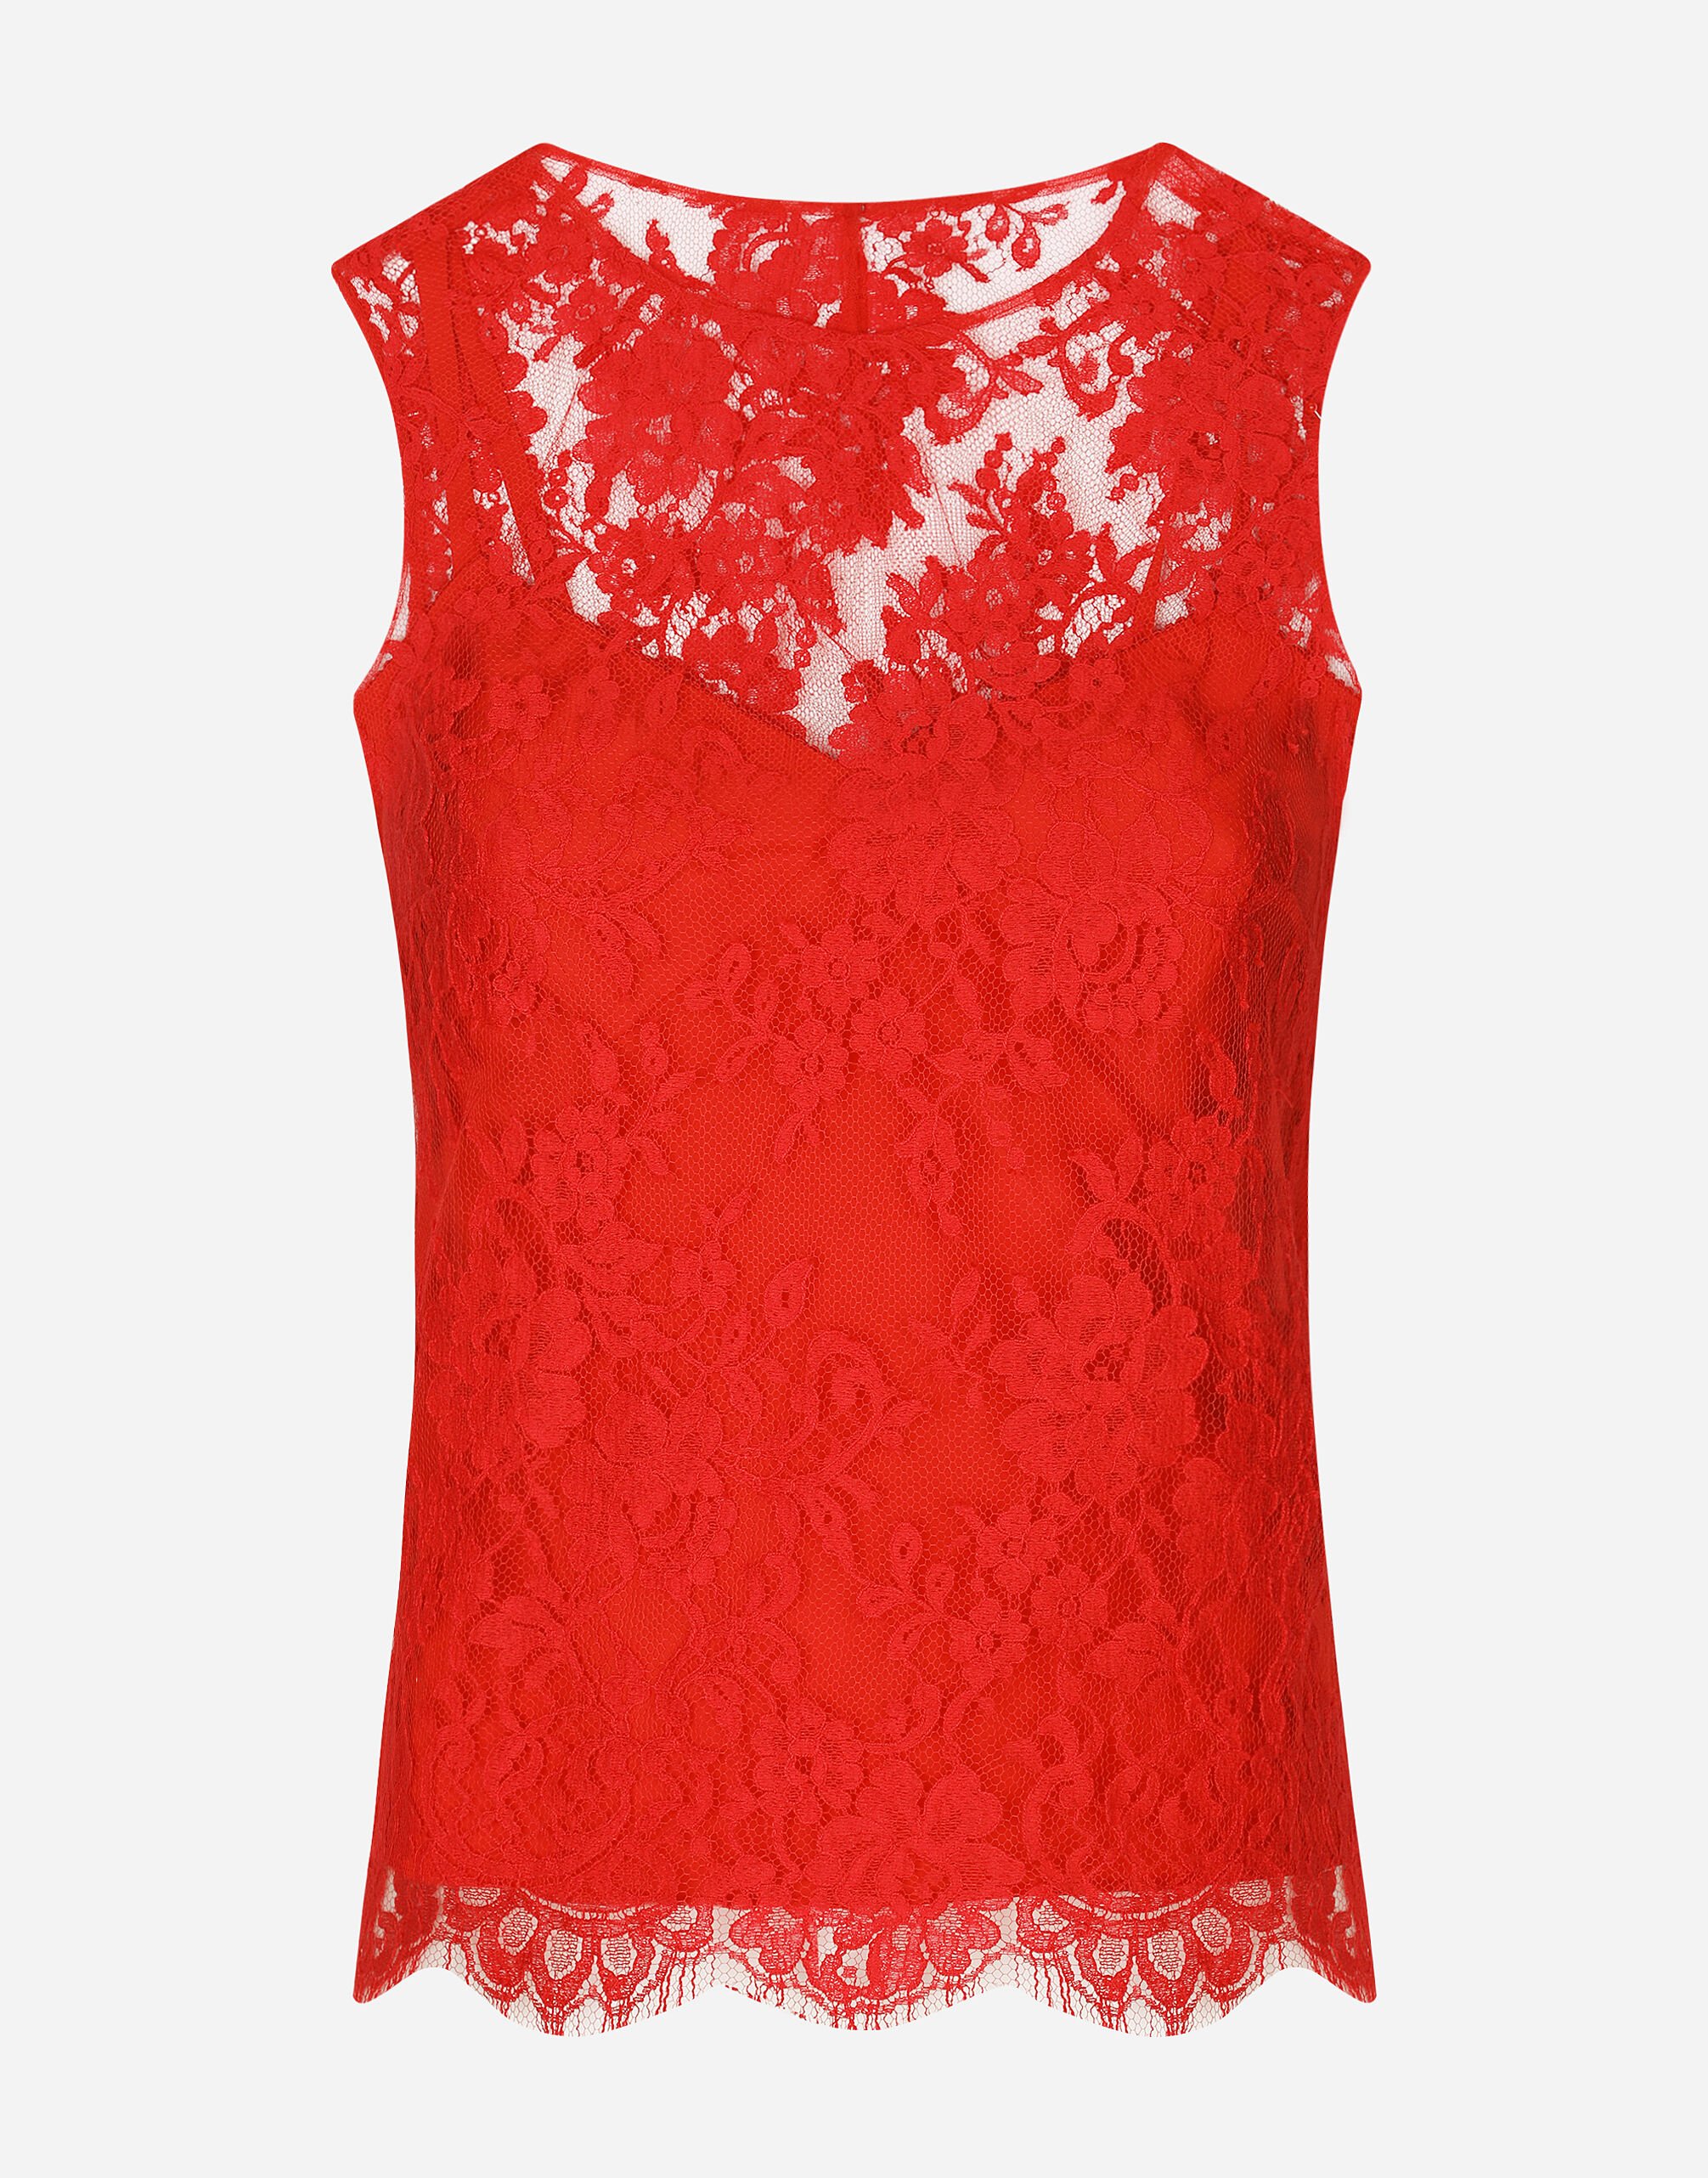 Dolce & Gabbana Floral Chantilly lace top Red F6BDLTFURAD